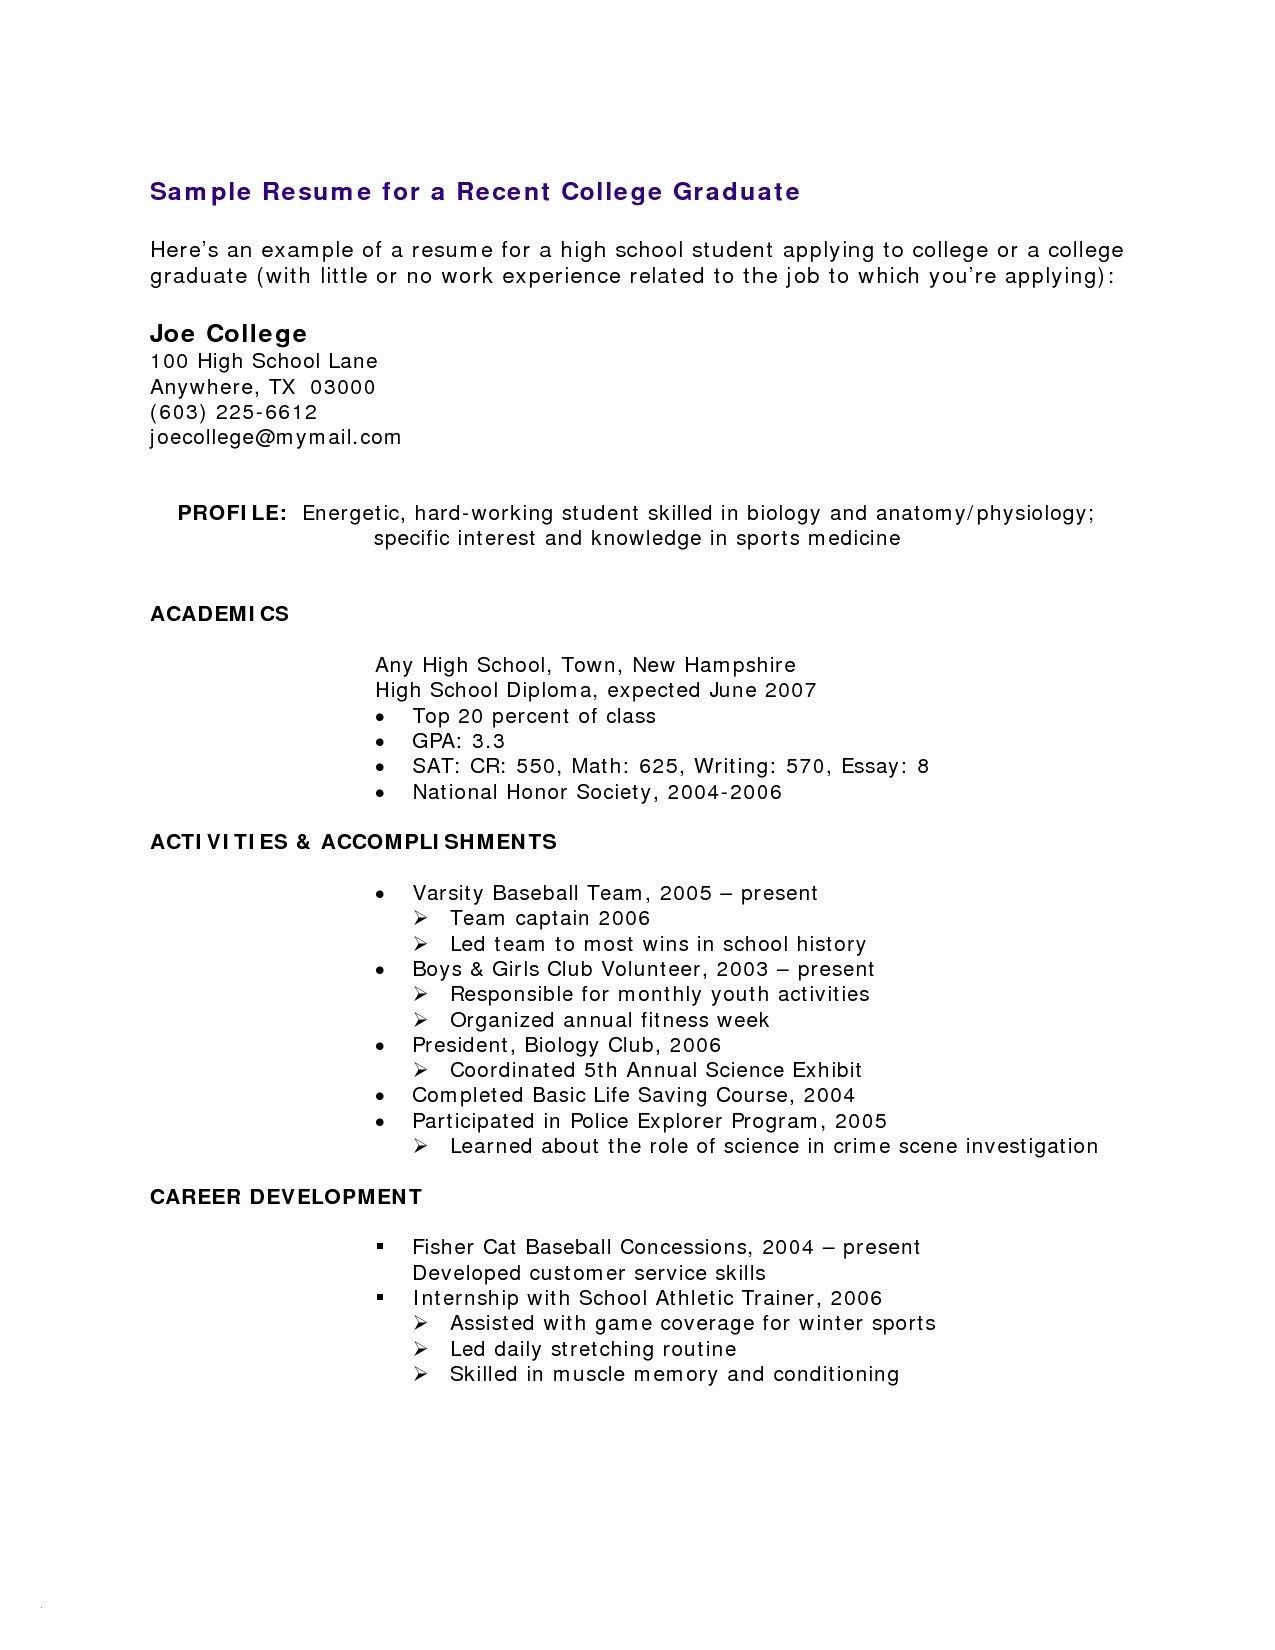 Sample Resume for High School Student with No Job Experience Pin On Resume